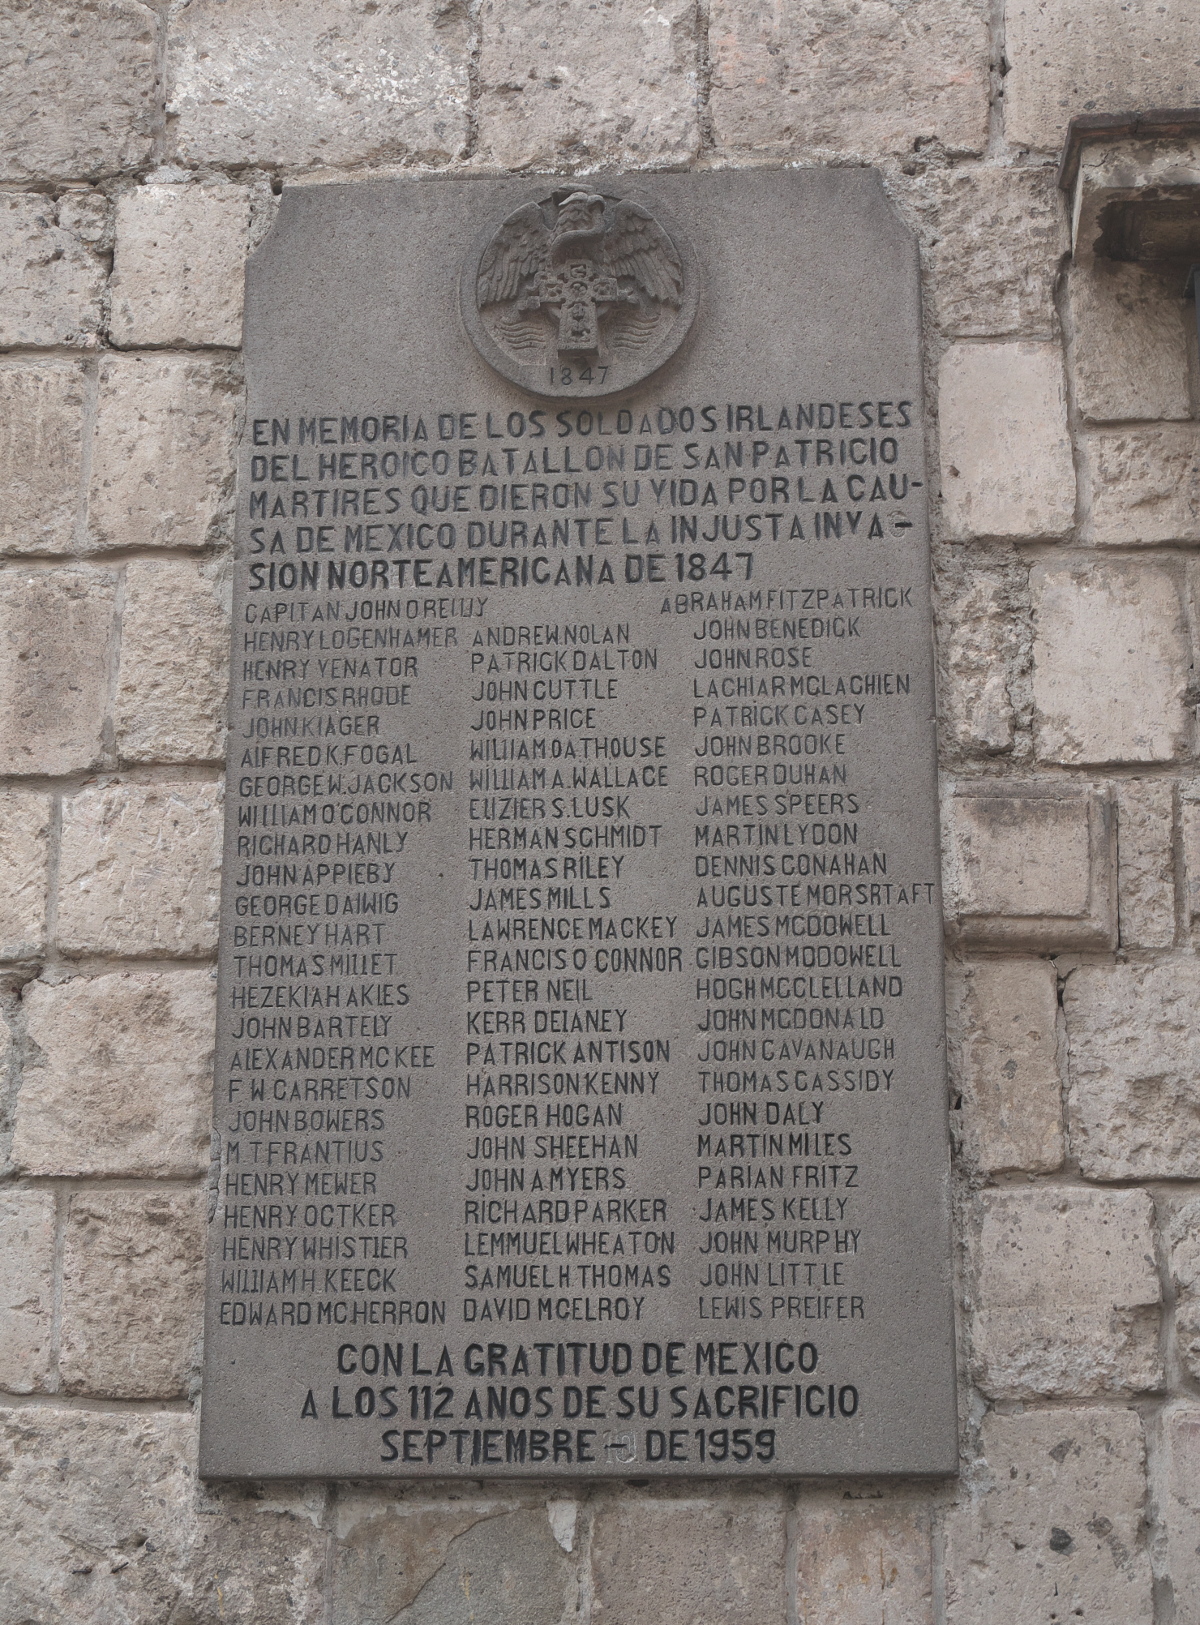 Plaque honoring the Sanpatricios in San Ángel, placed in 1959.